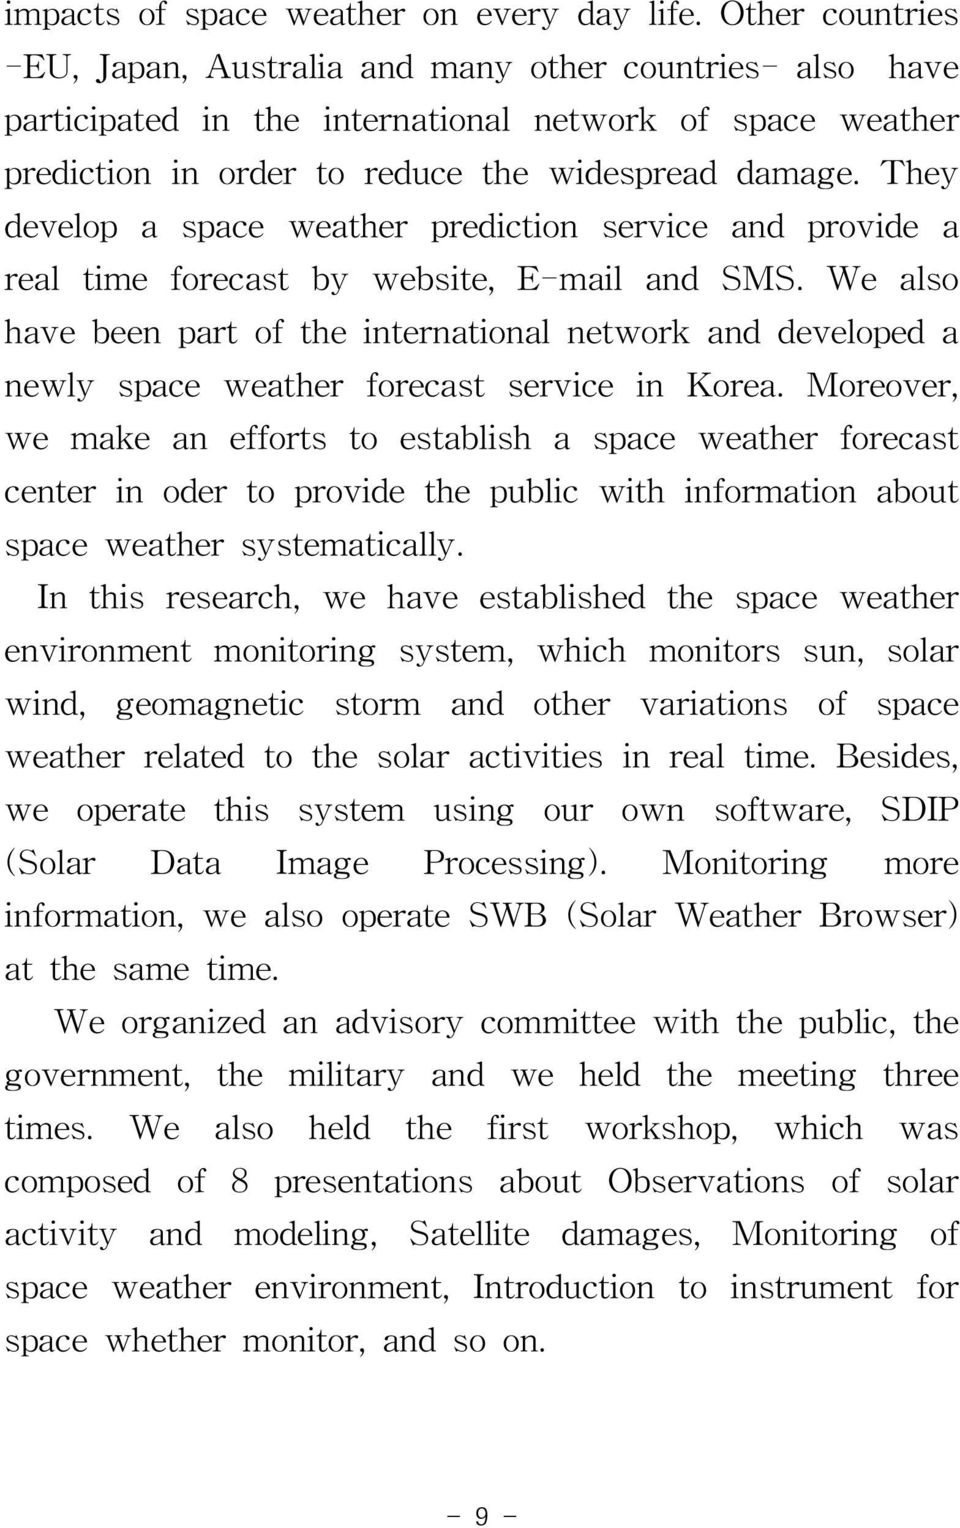 They develop a space weather prediction service and provide a real time forecast by website, E-mail and SMS.